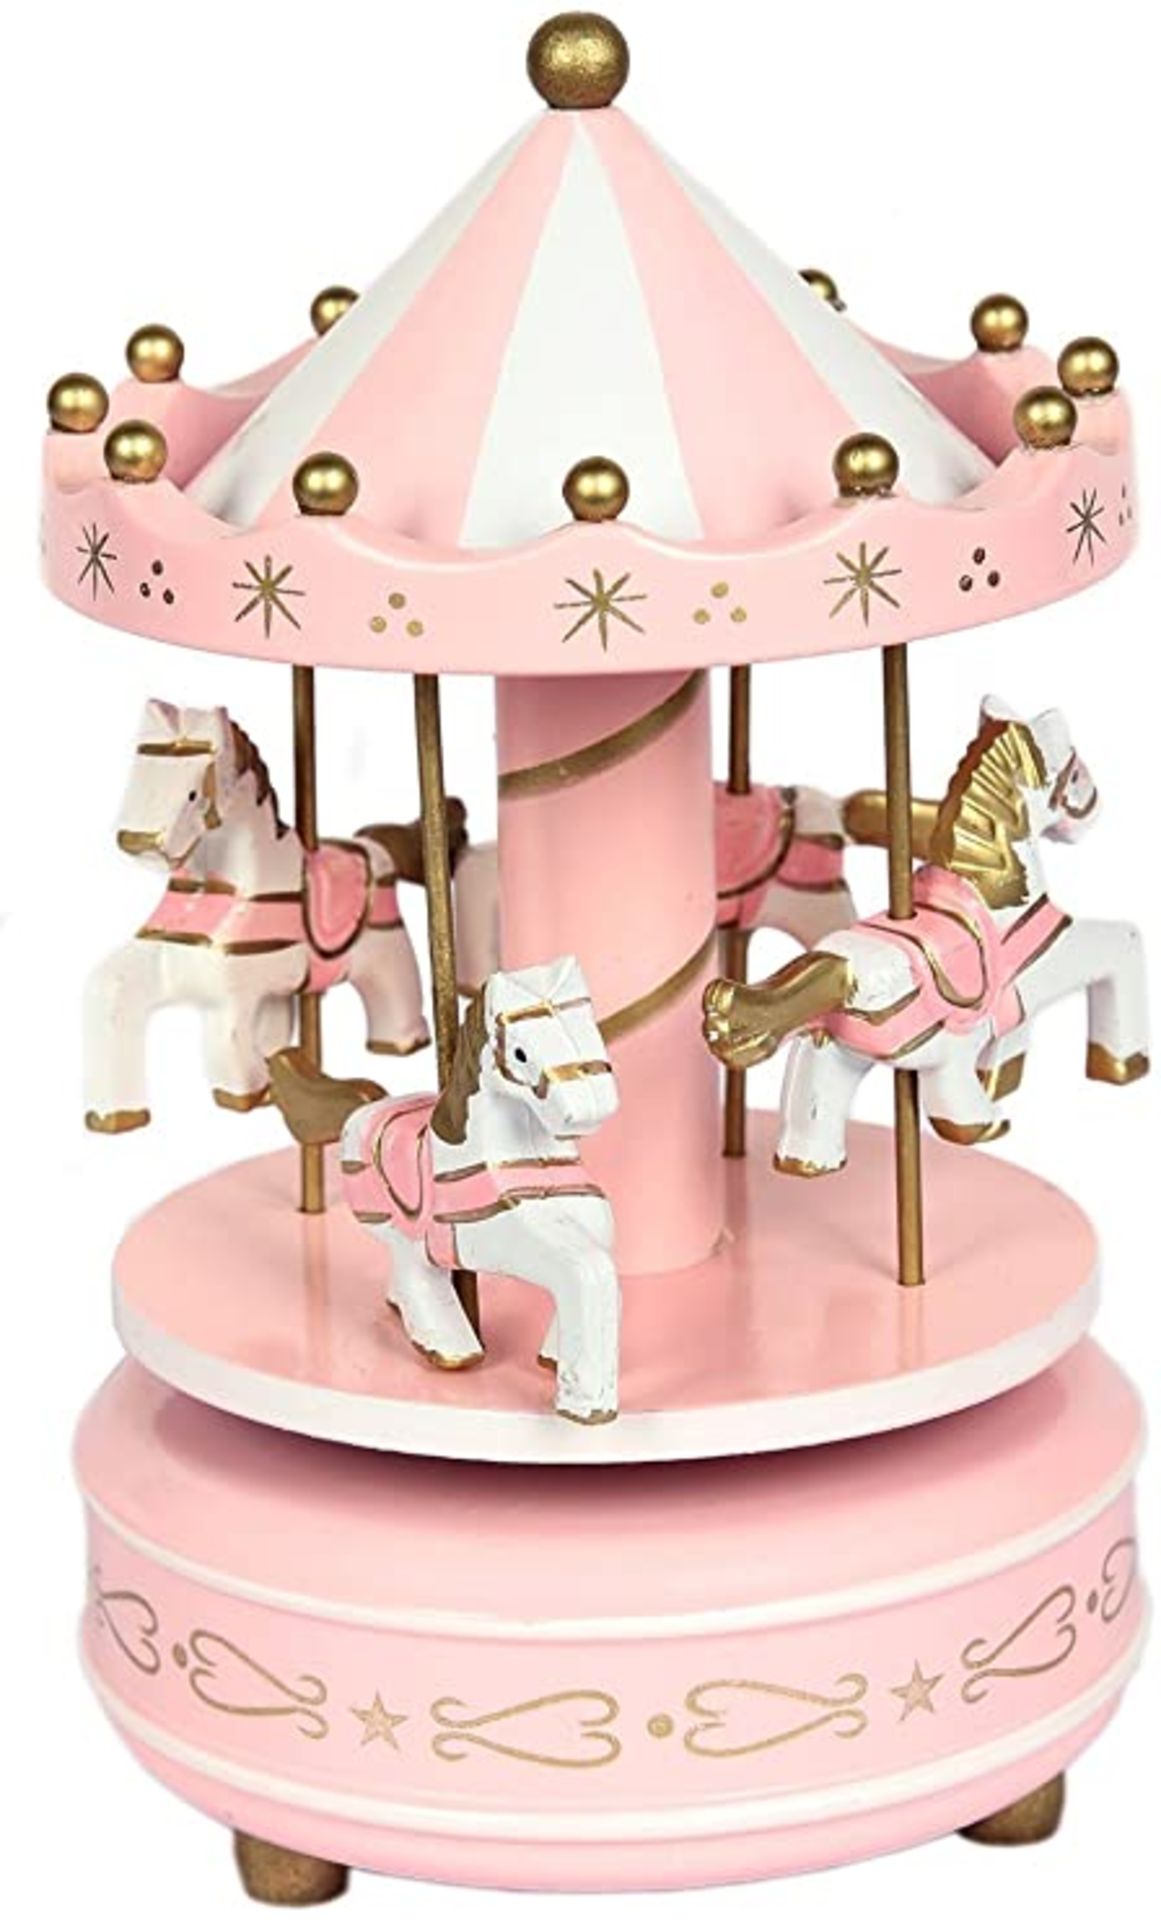 RRP - £7.20 Carousel Music Box Vintage Merry-Go-Round Toy Birthday/Christmas/Children Gifts(Pink)